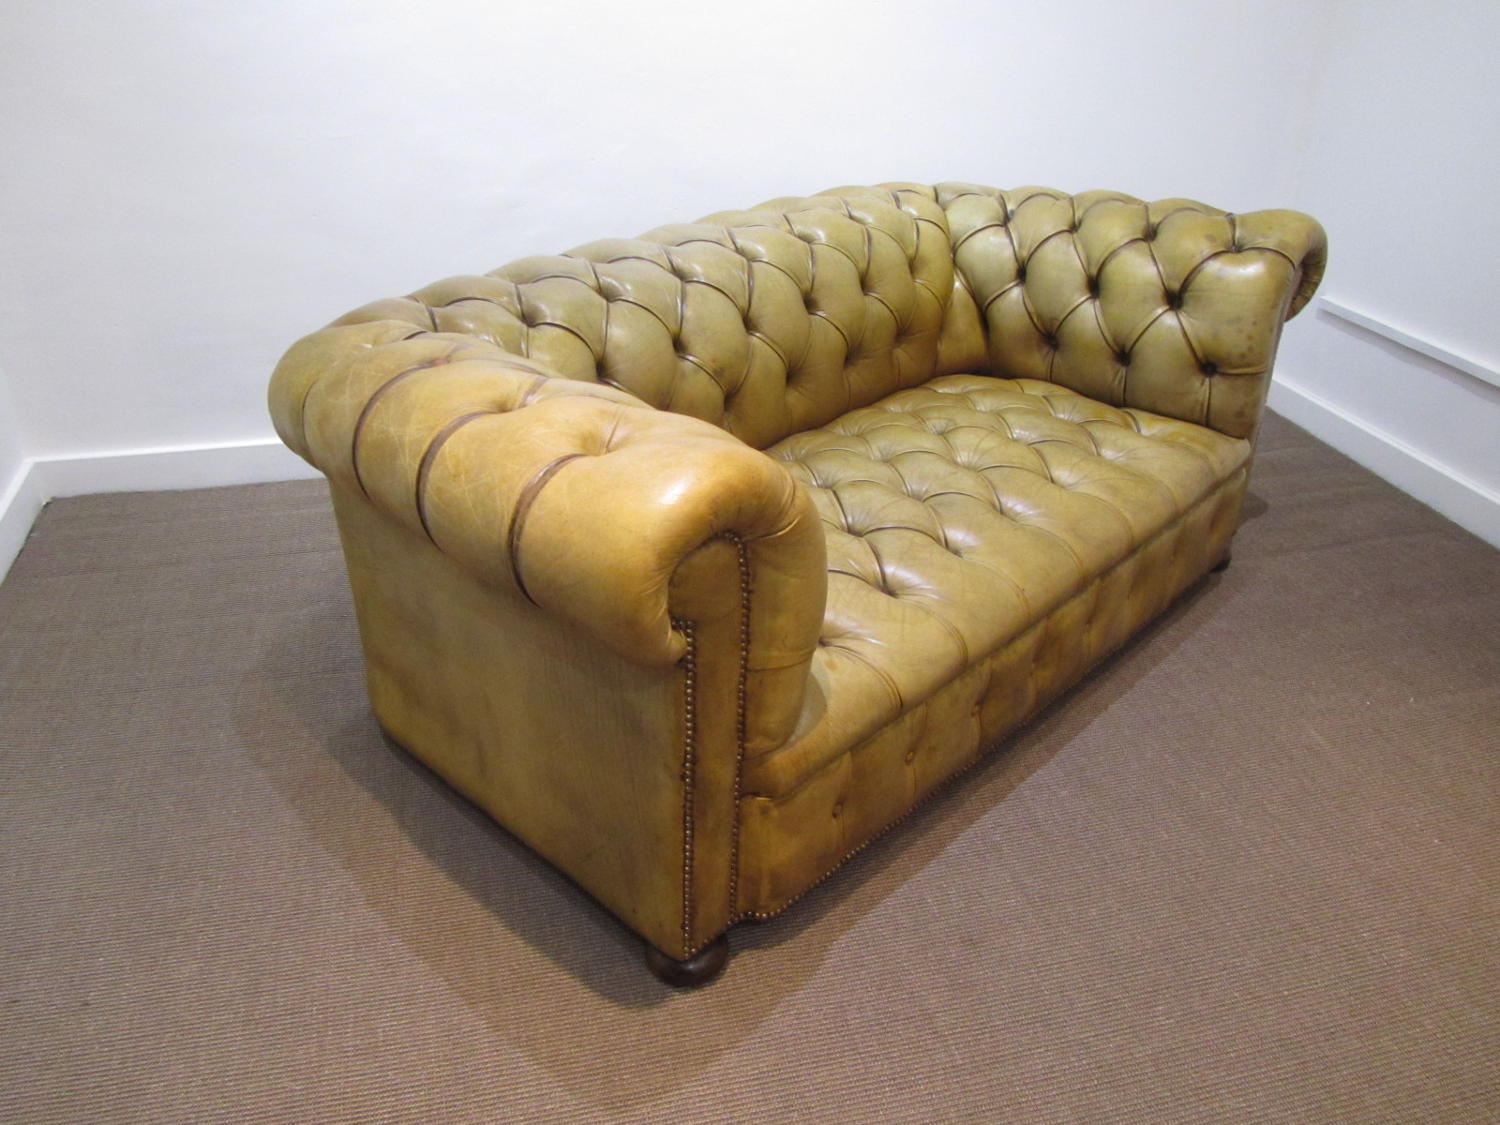 A Petite leather chesterfield sofa